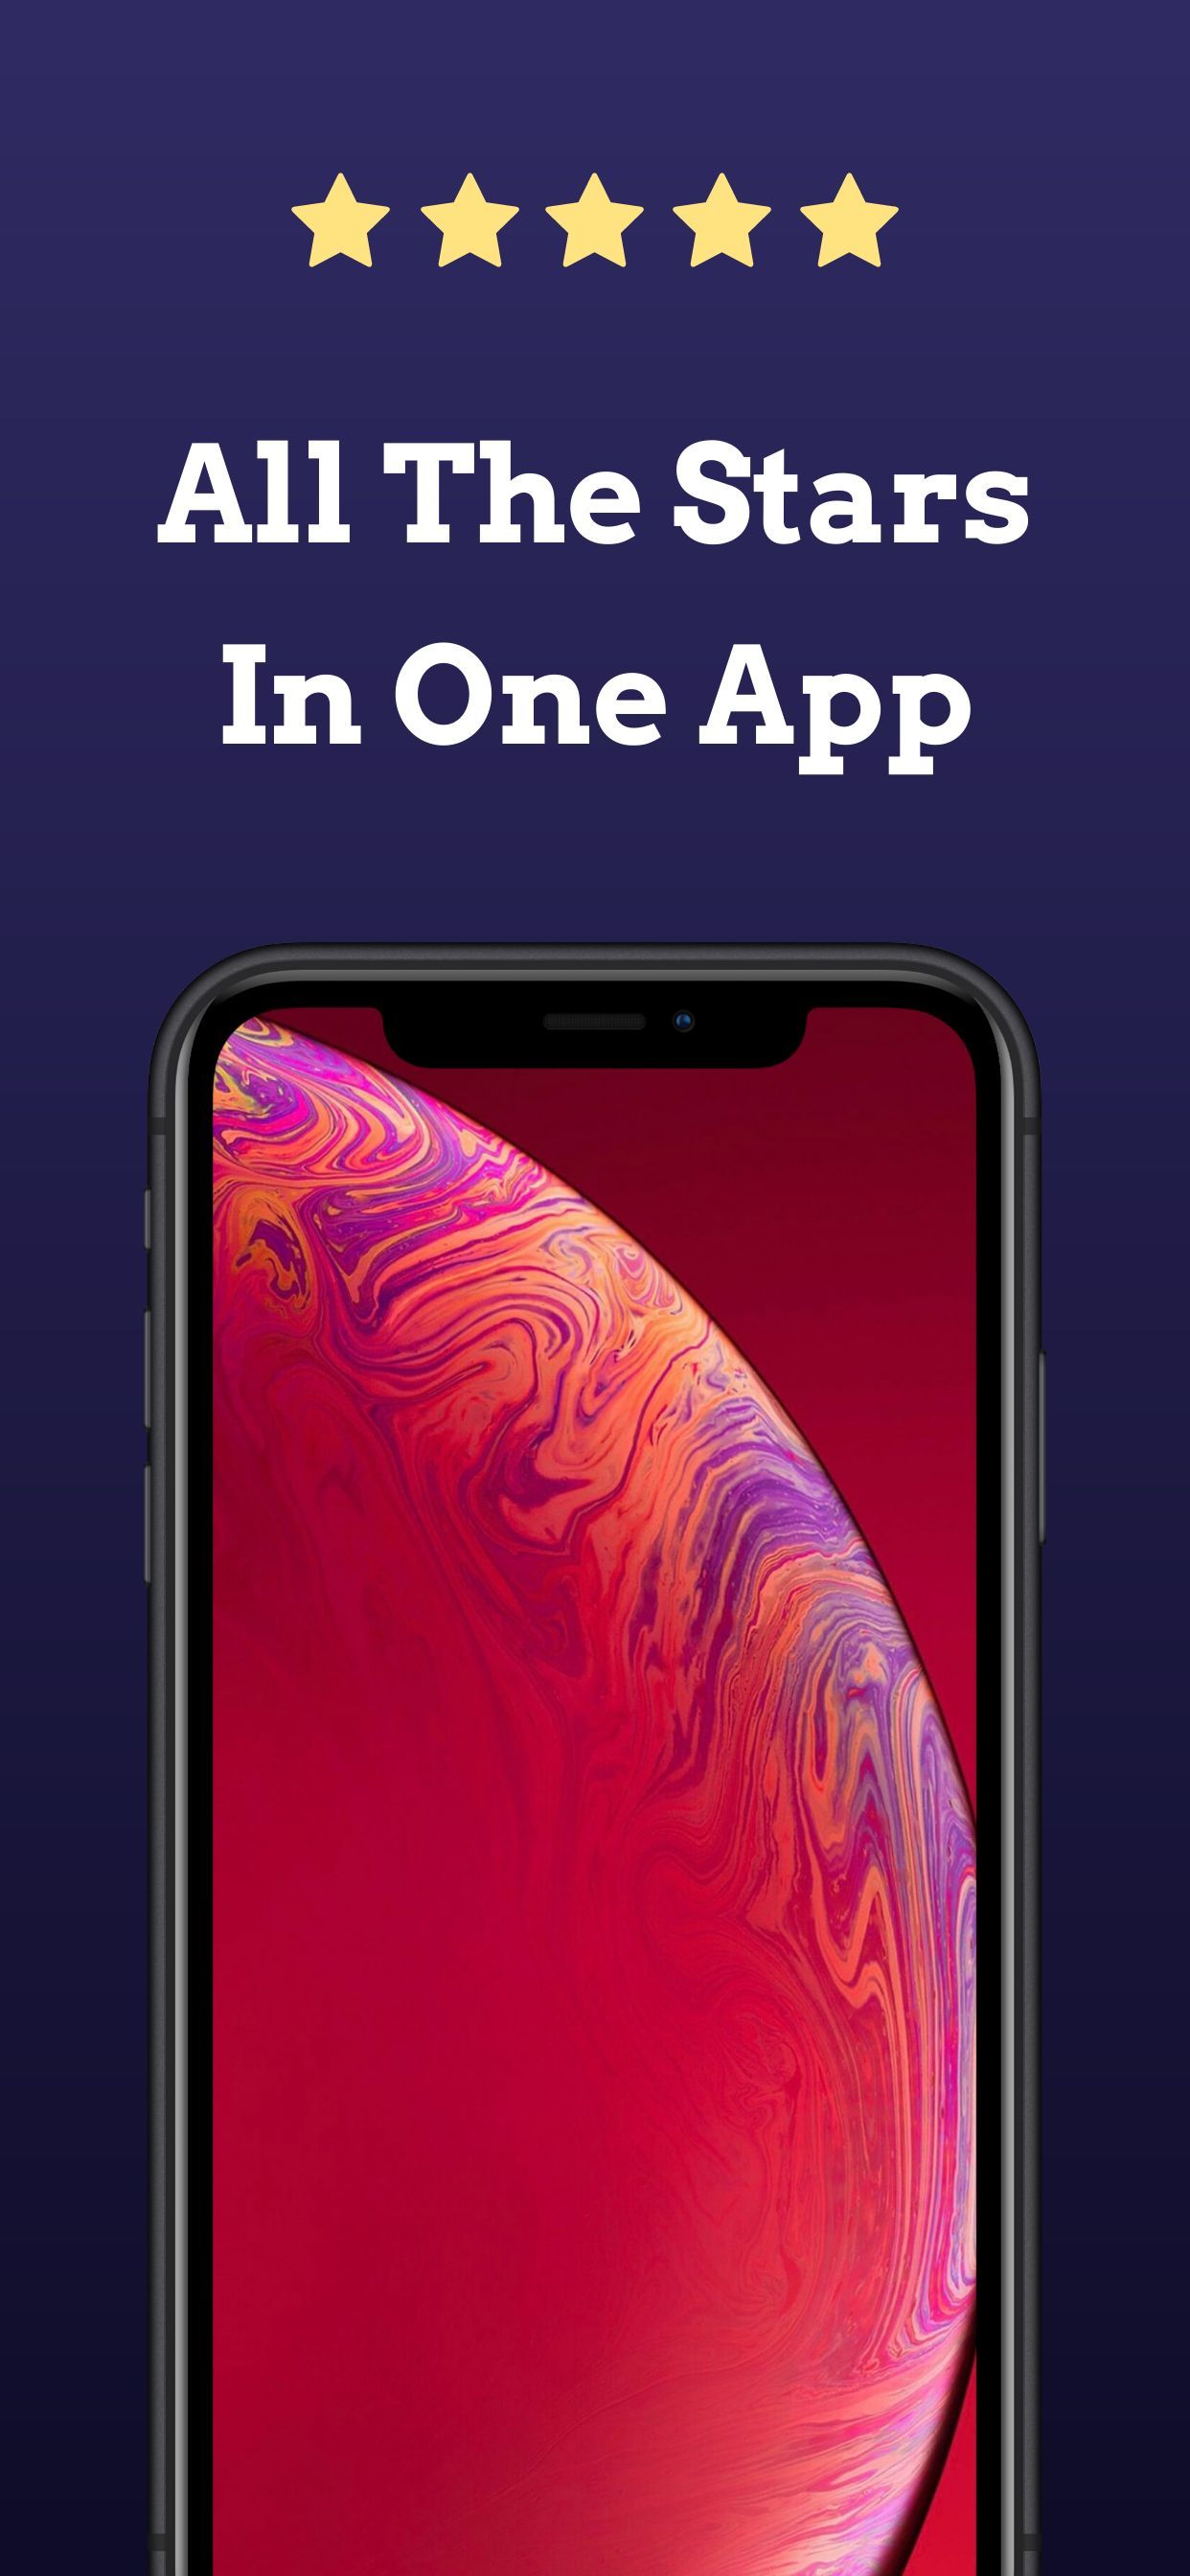 iPhone XS Max Screenshot 32 template. Quickly edit fonts, text, colors, and more for free.